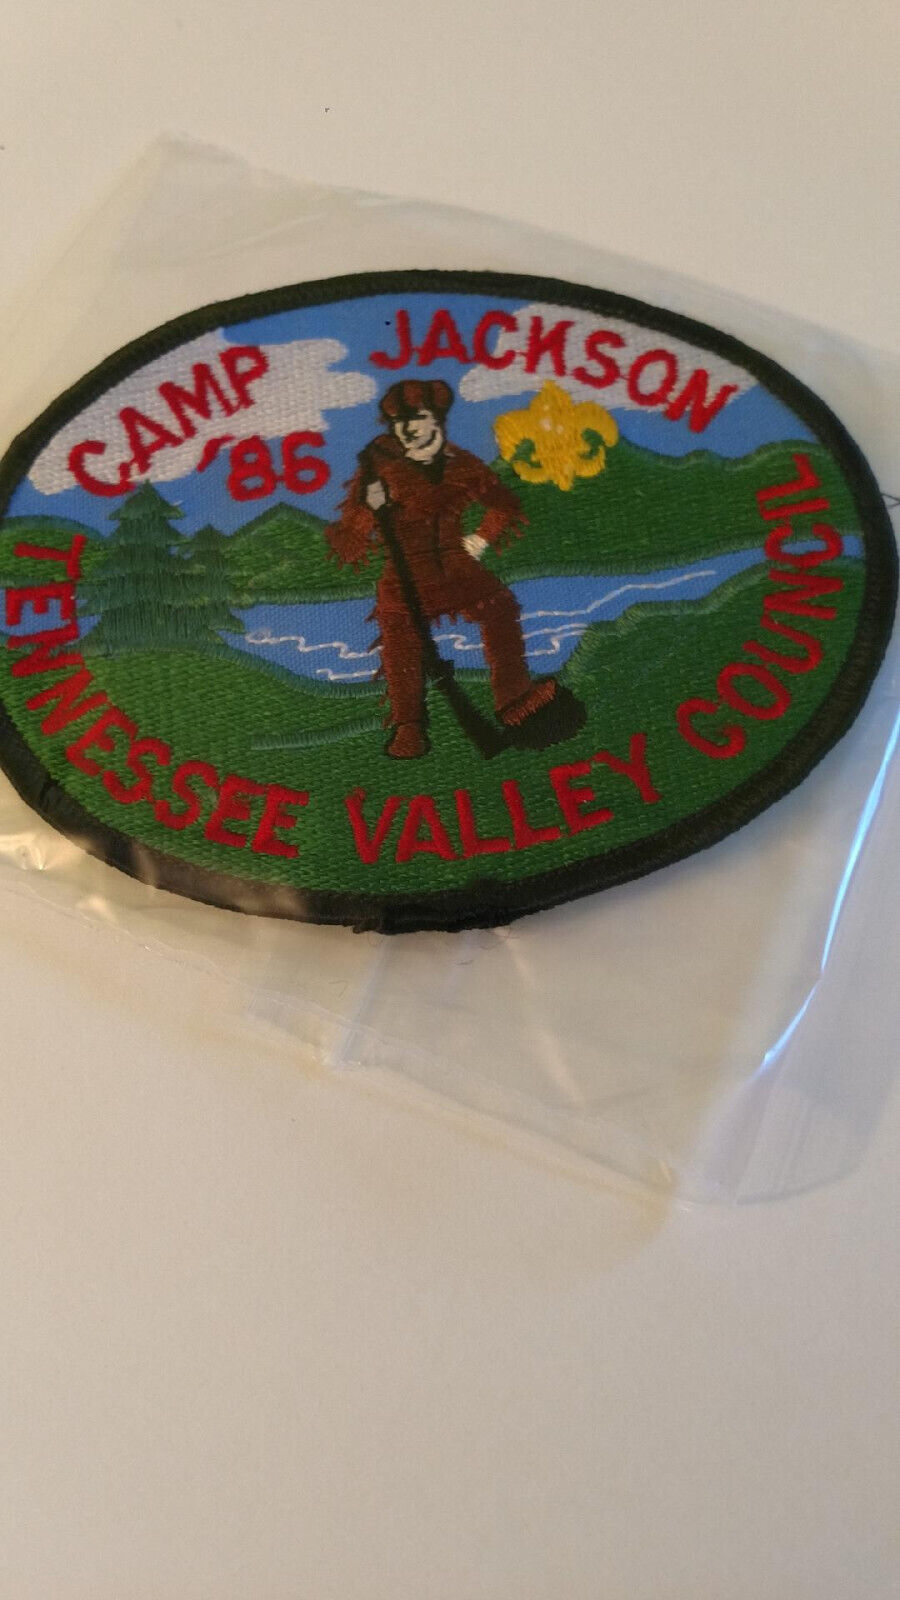 BSA, Camp Jackson, 1986, Tennessee Valley Council